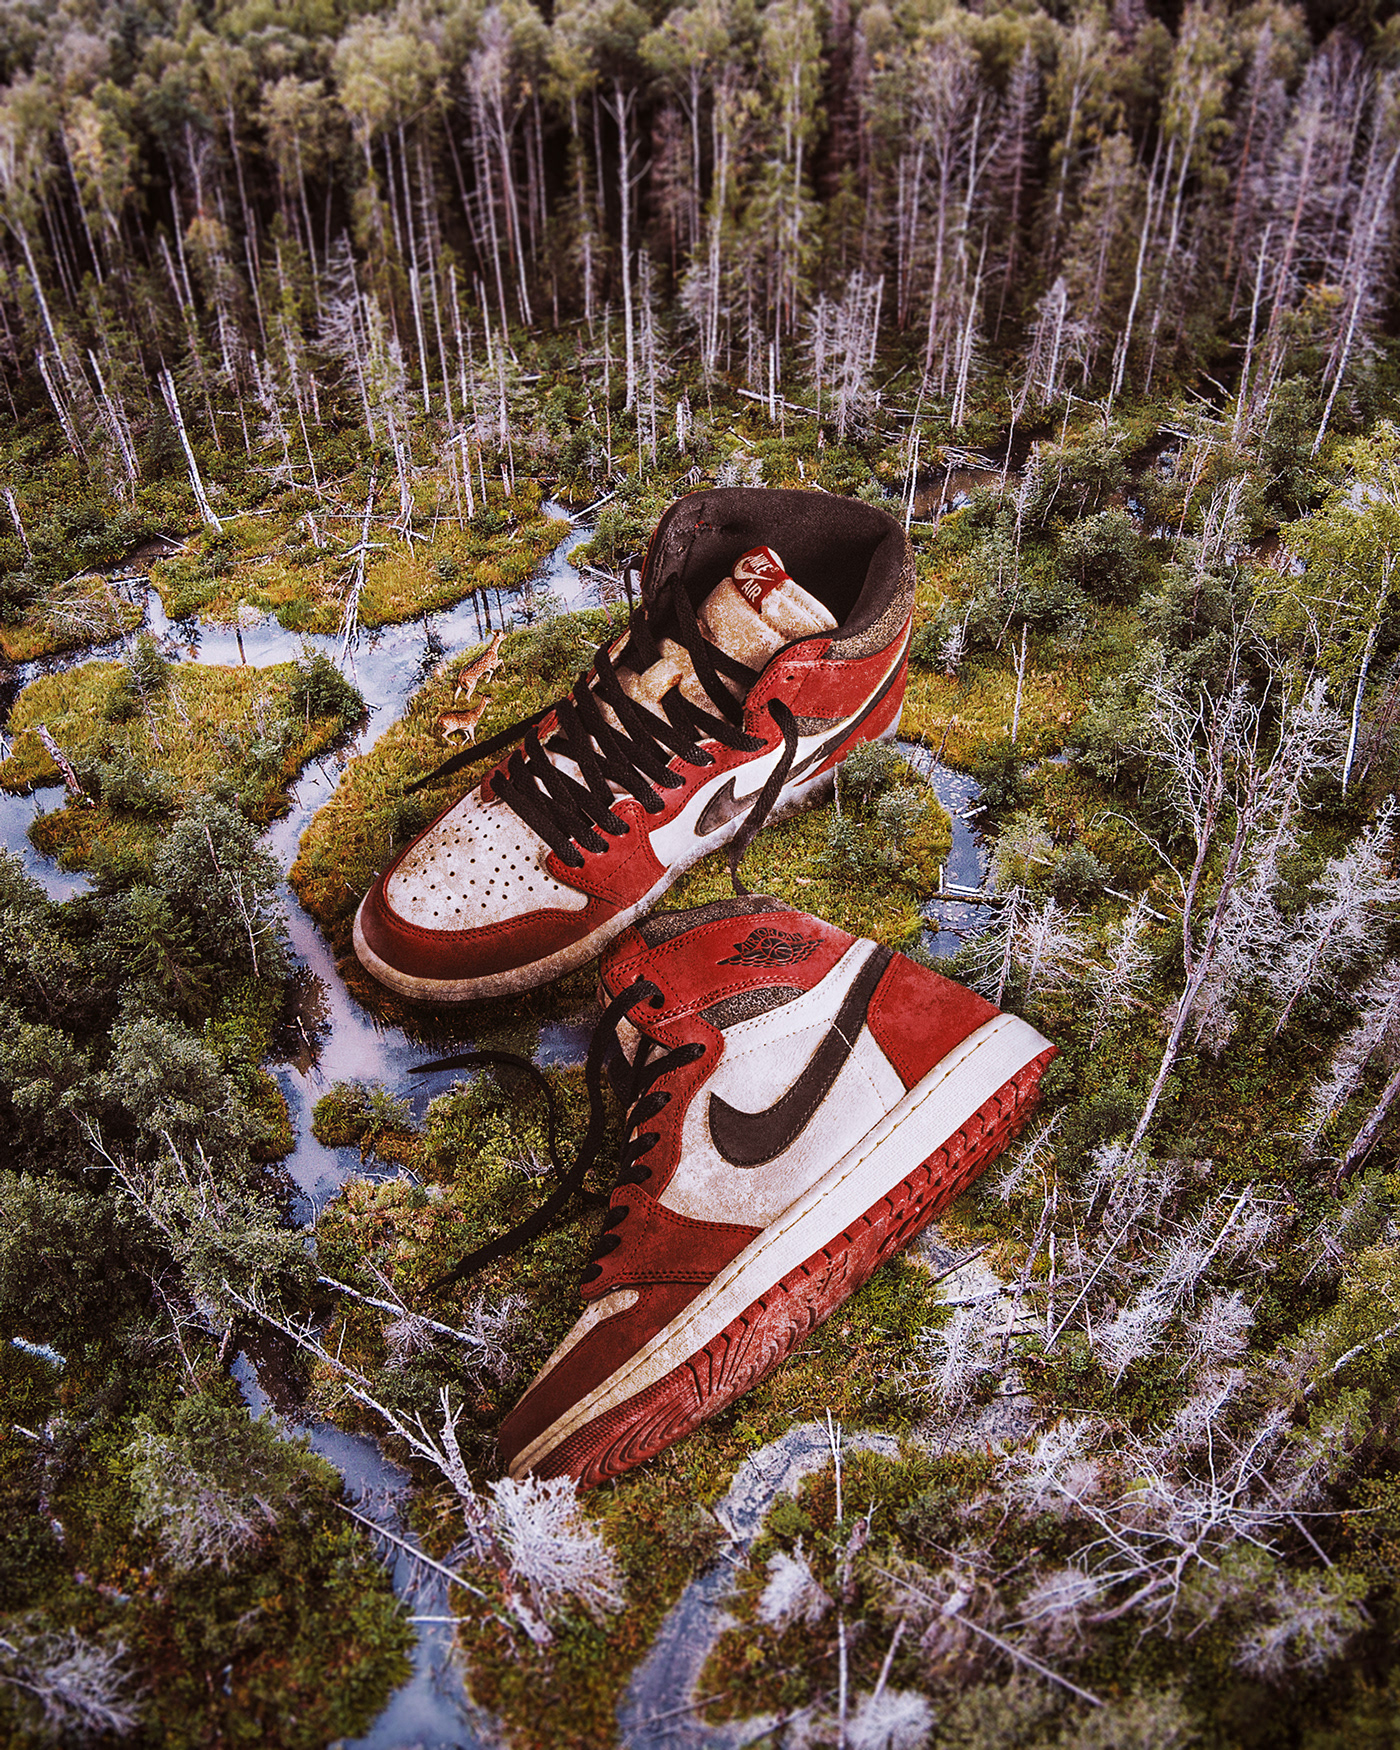 Giant sneaker photo composite in a forest . Retouching using Photoshop